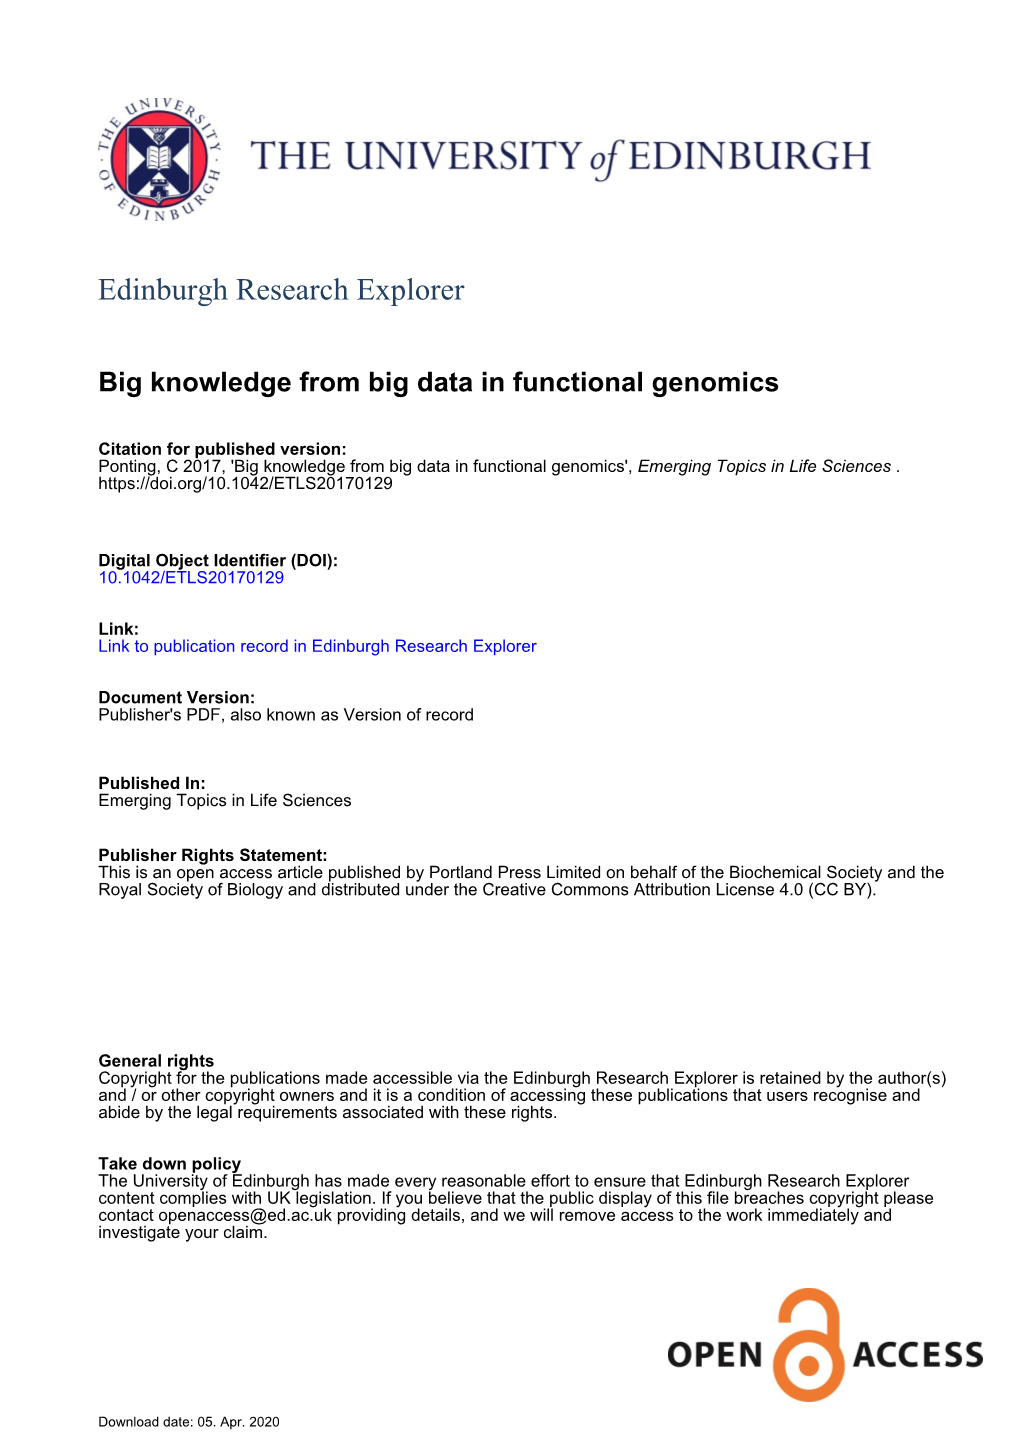 Big Knowledge from Big Data in Functional Genomics